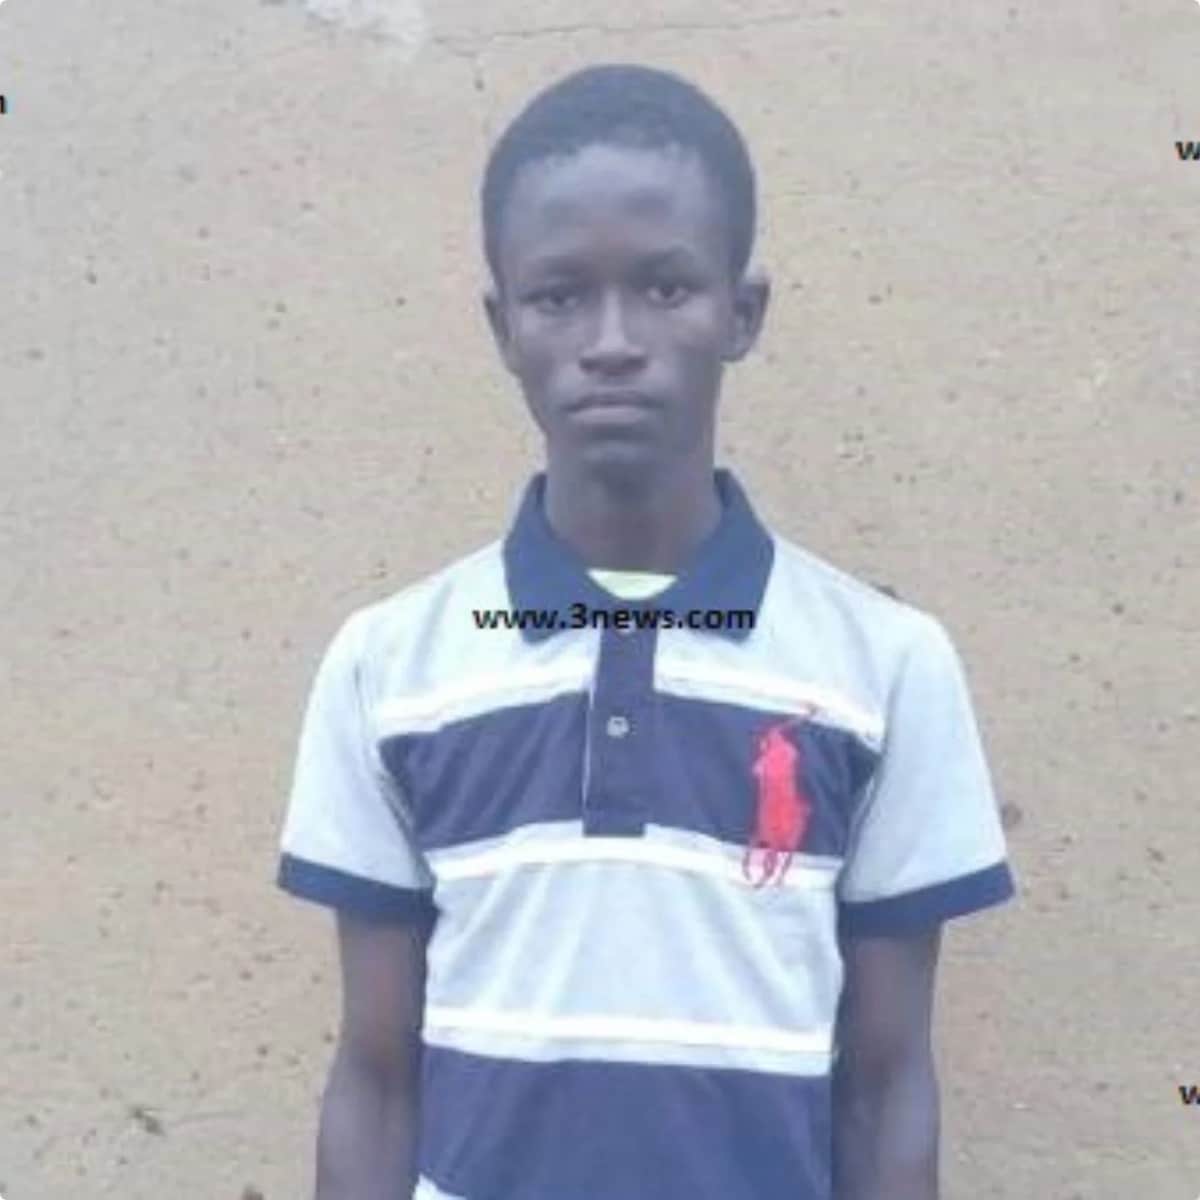 Navraongo SHS student who got 8 A's in WASSCE receives massive support